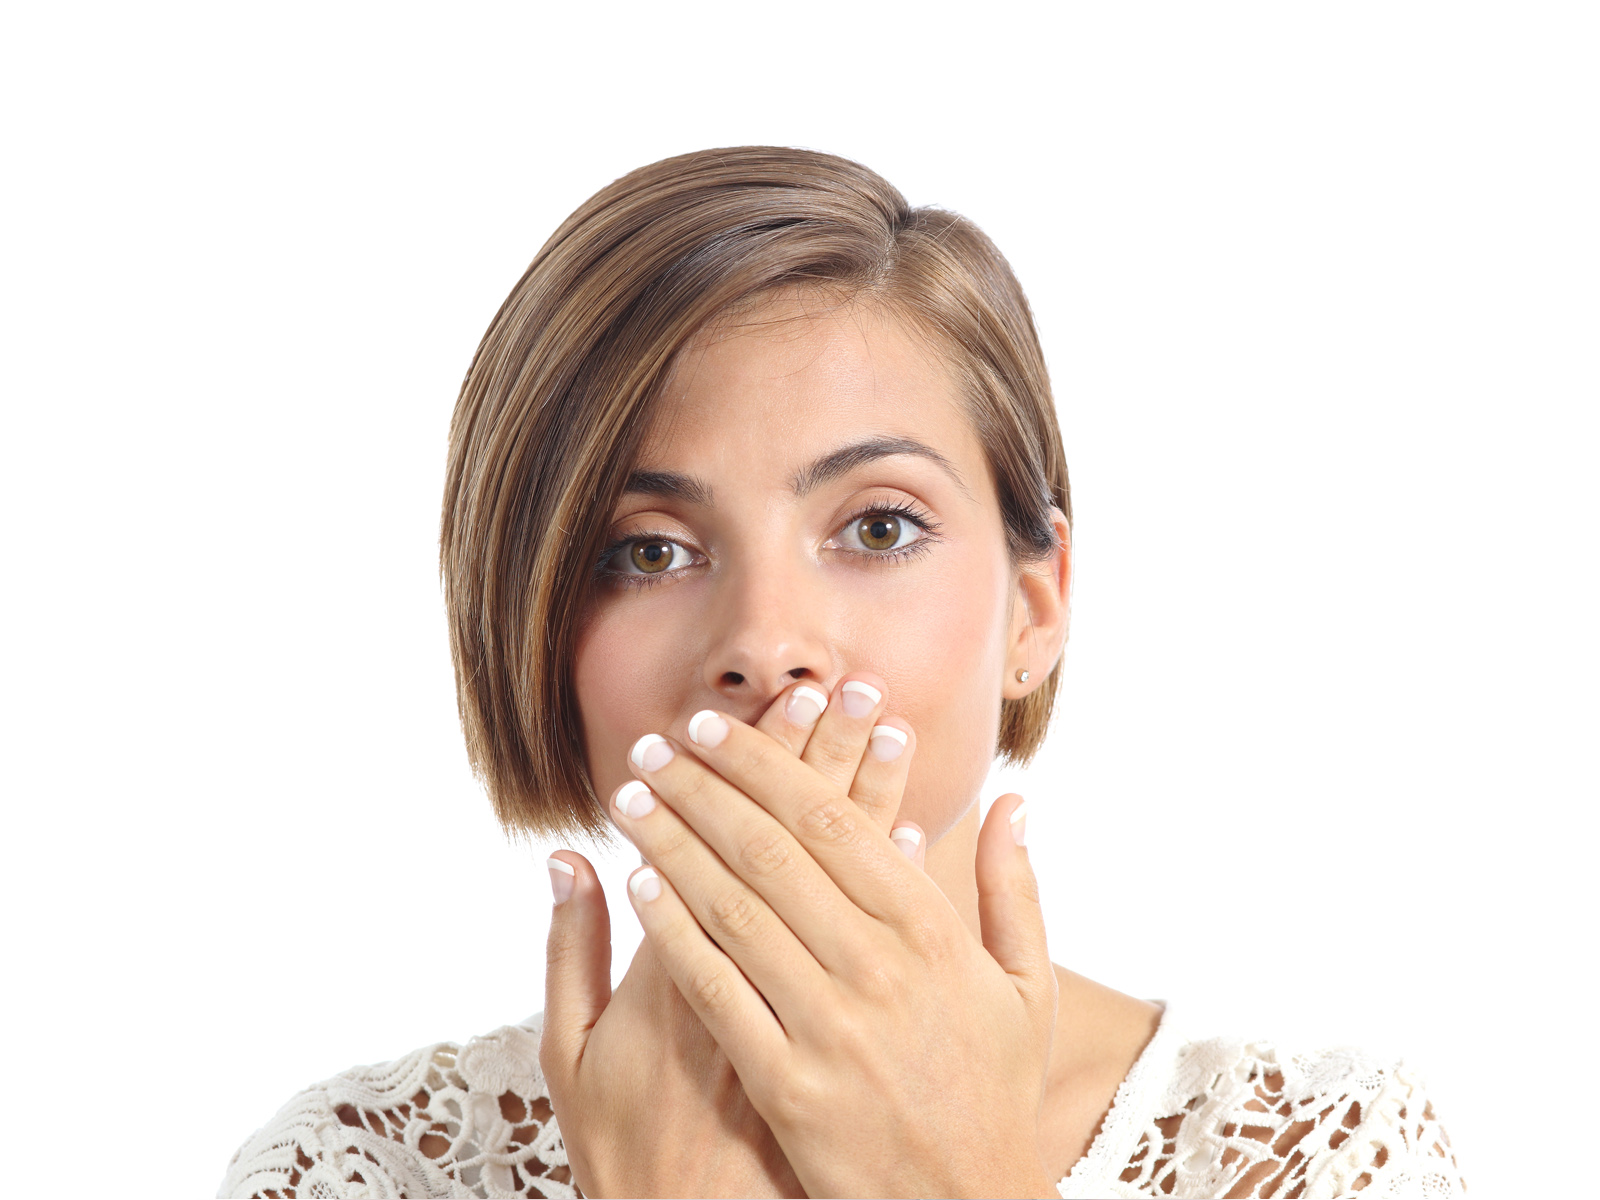 Why Do Poor Habits Cause Bad Breath?